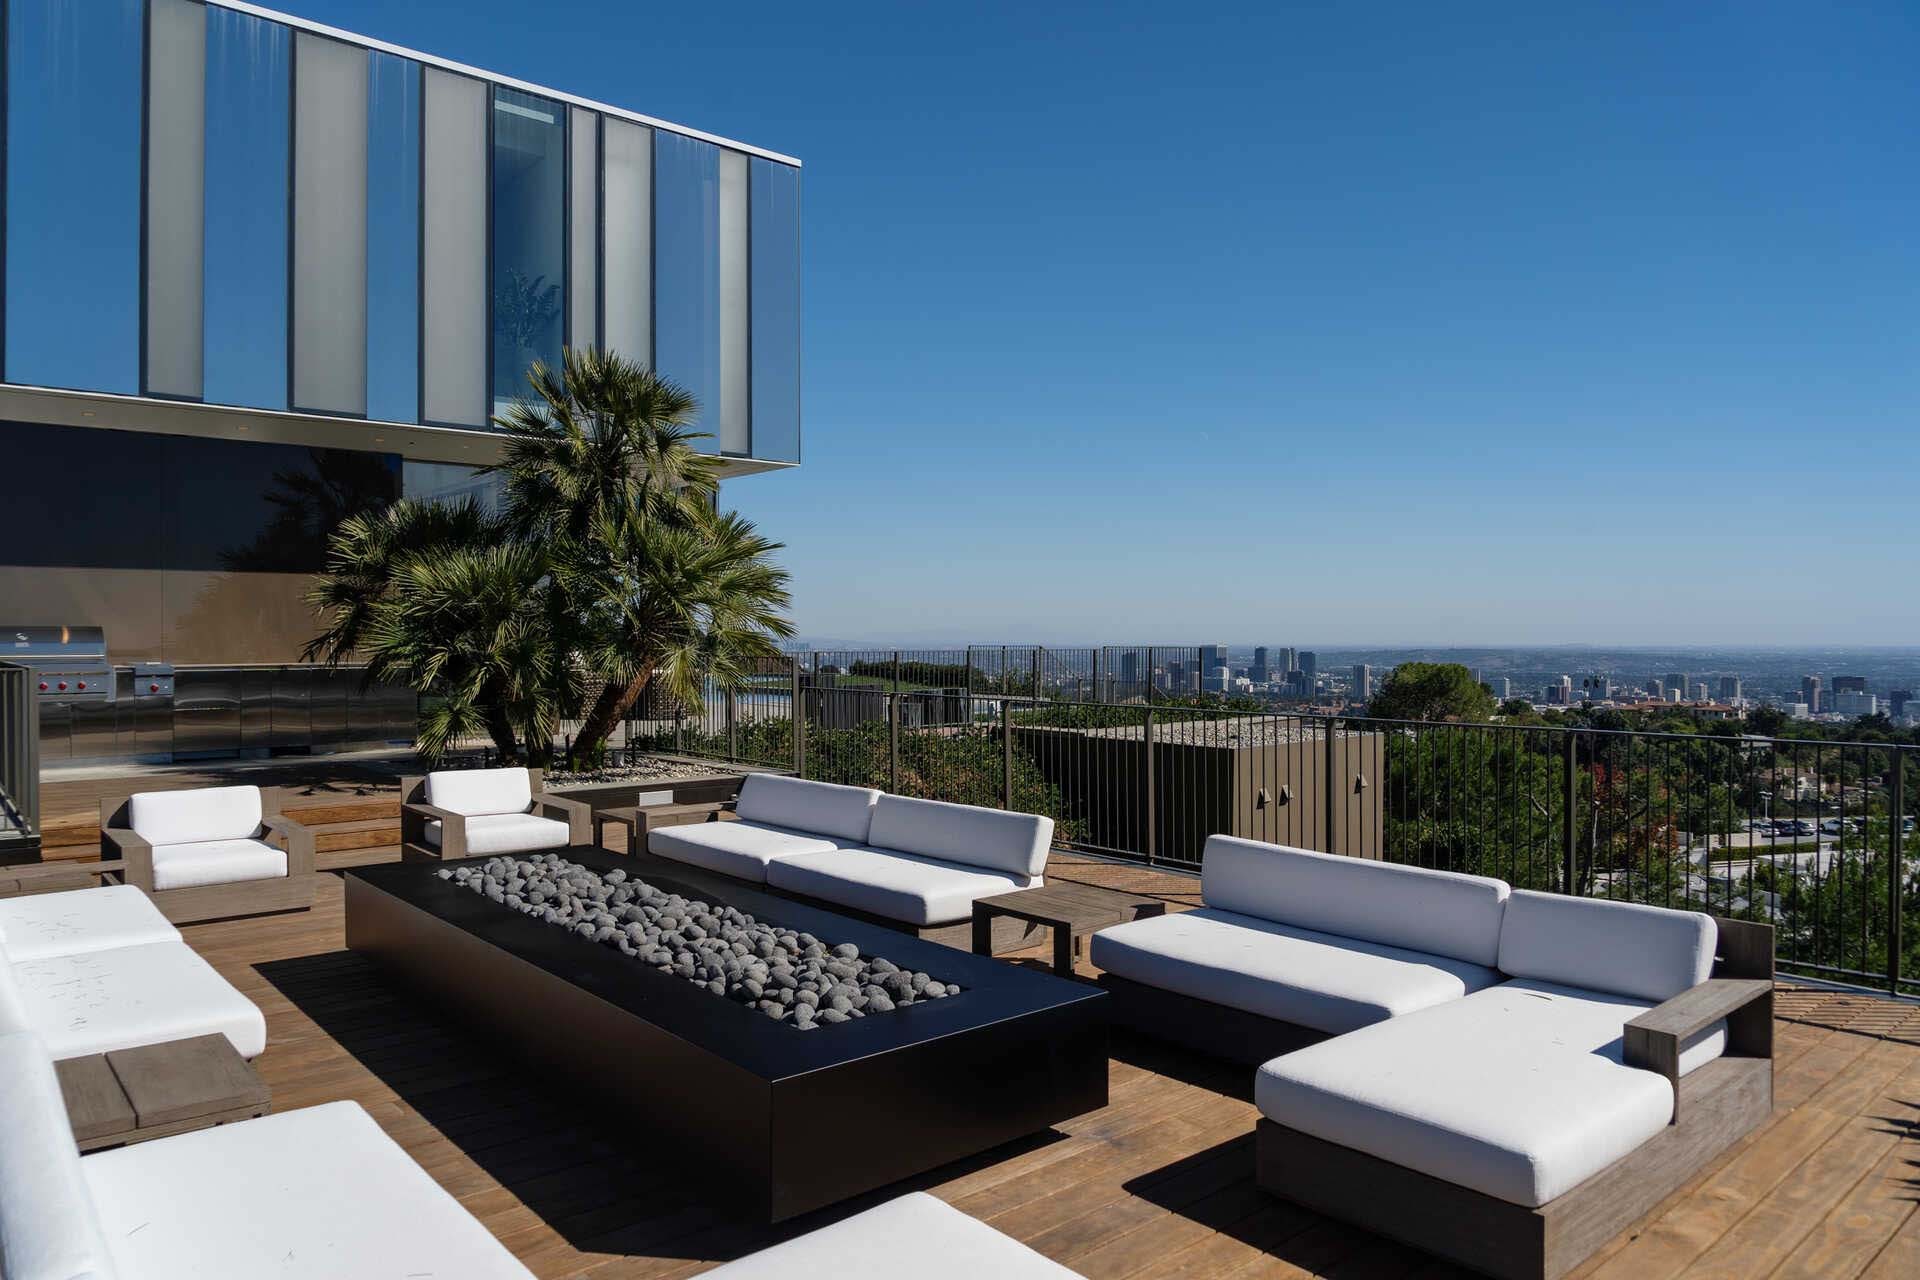 The Orum House in Los Angeles